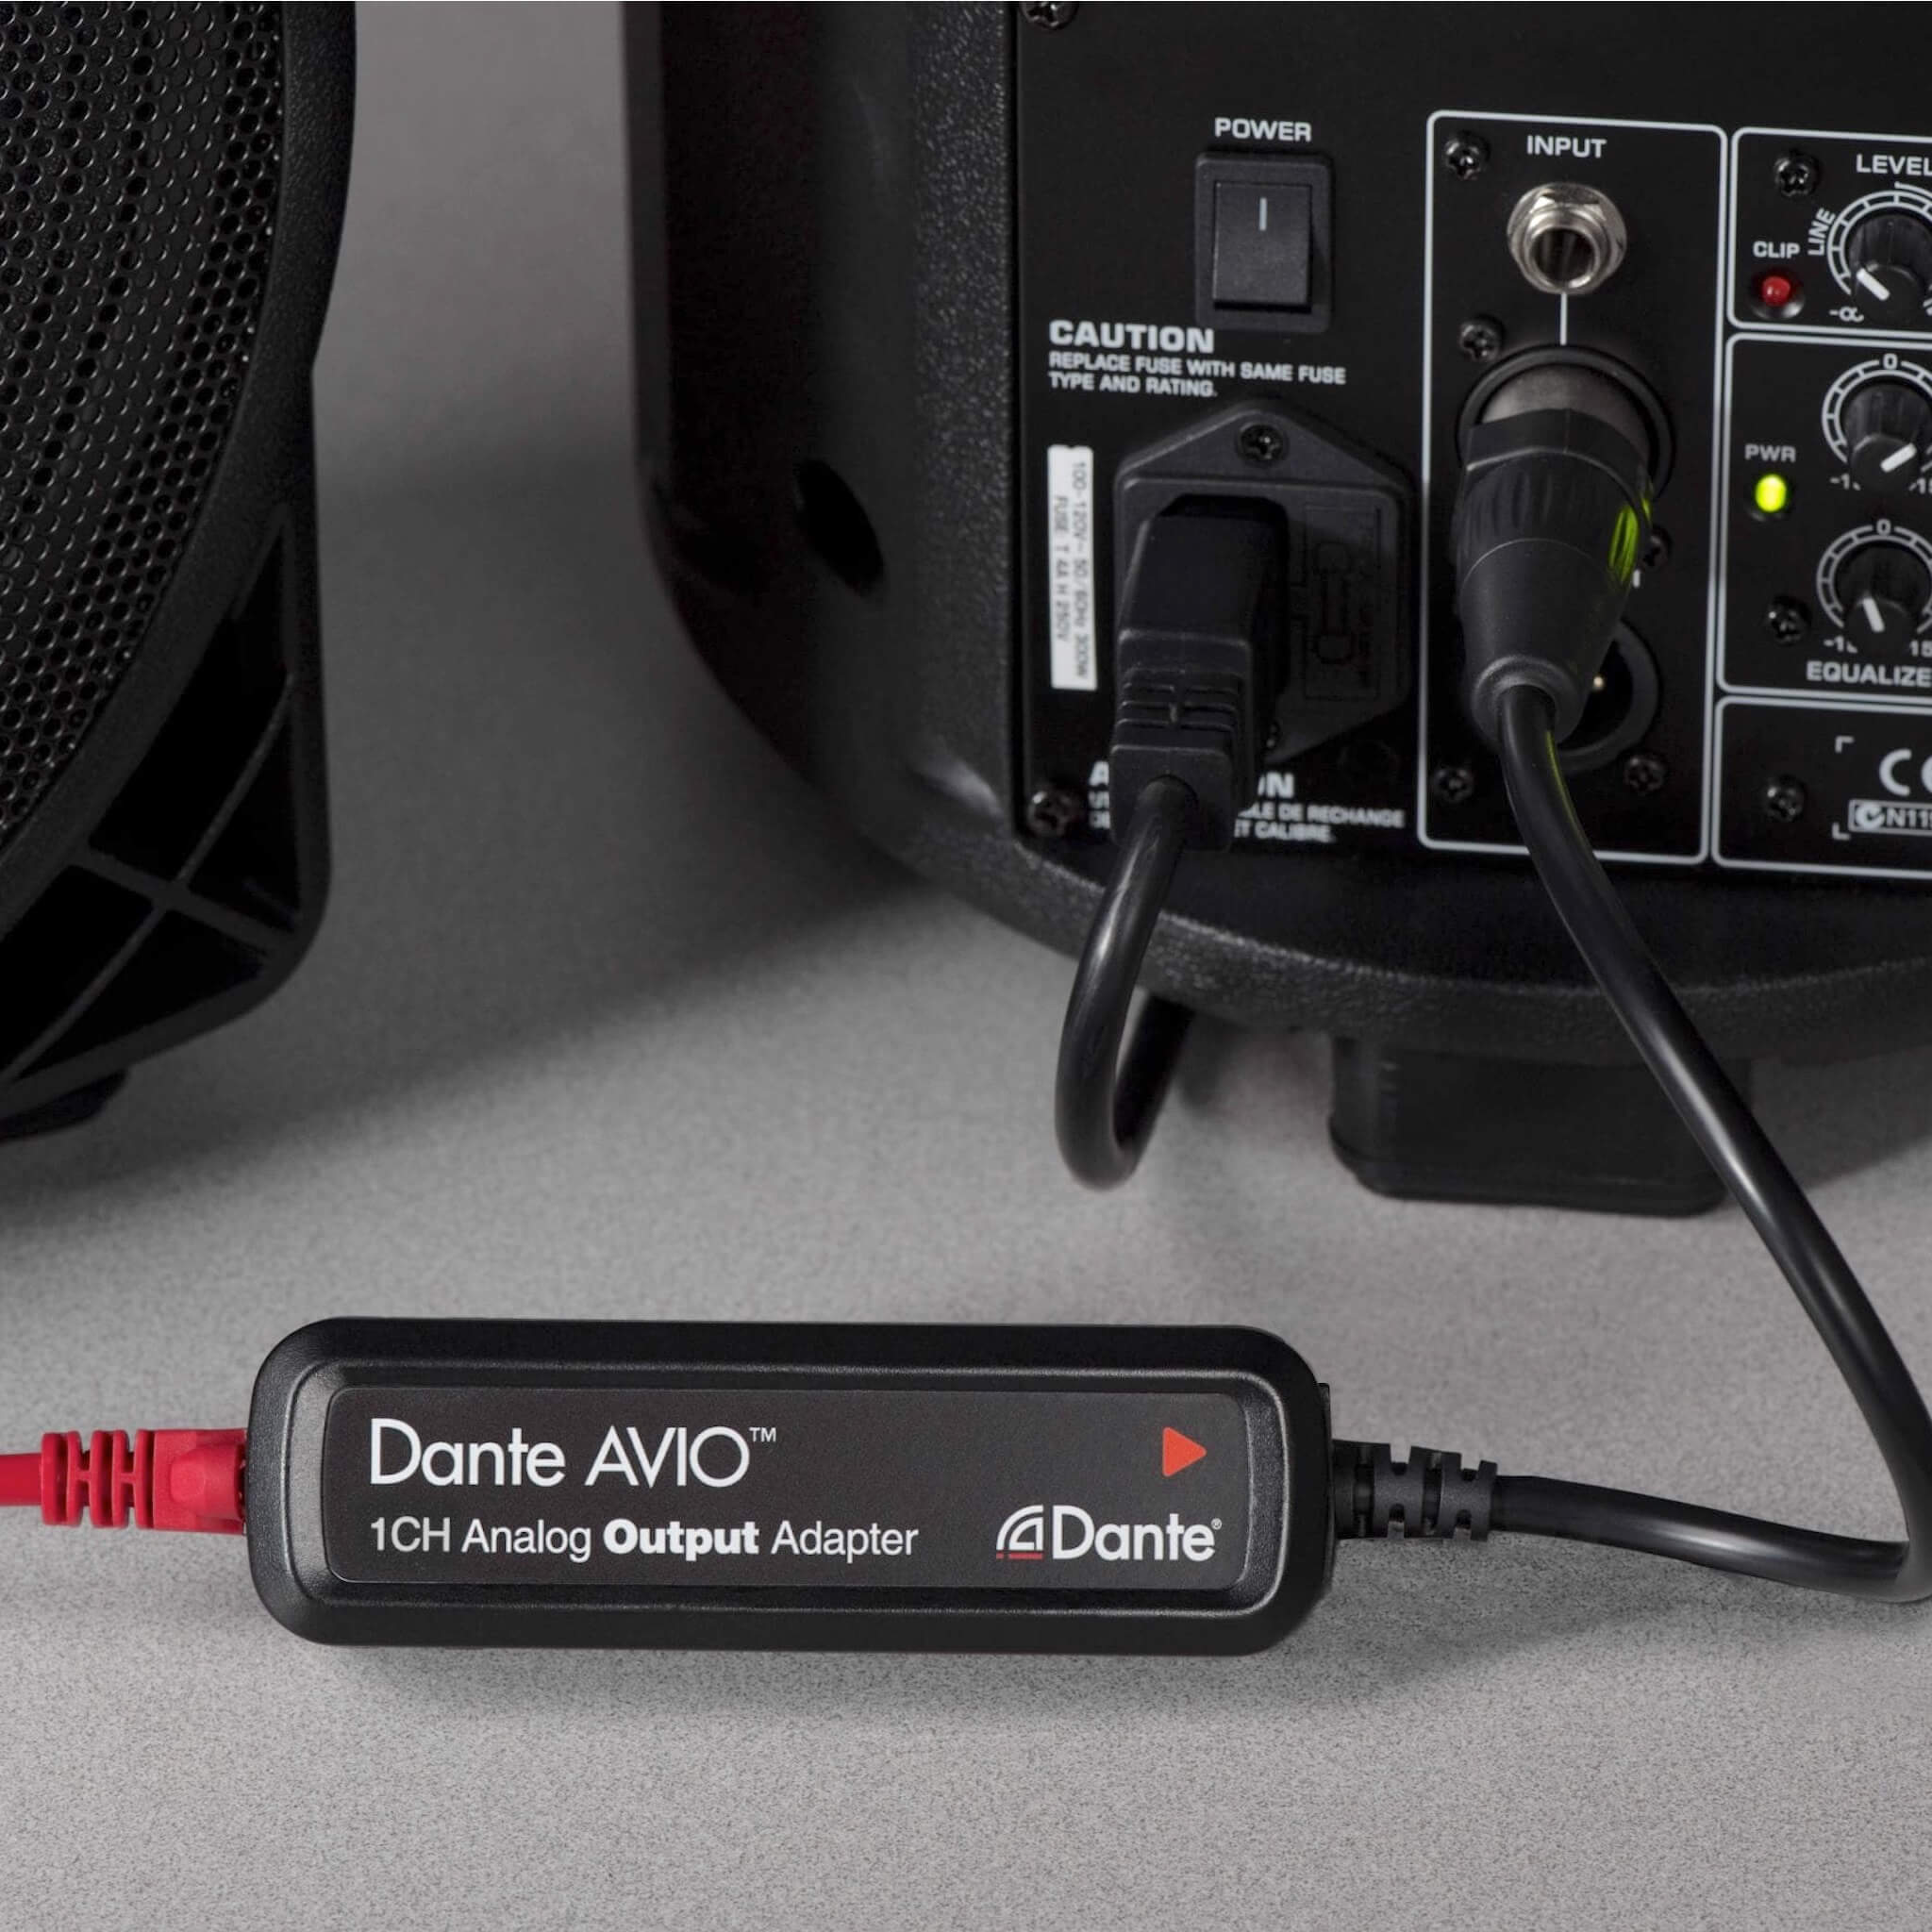 Audinate Dante AVIO 1-Channel Analog Output Adapter, connected to a portable PA system